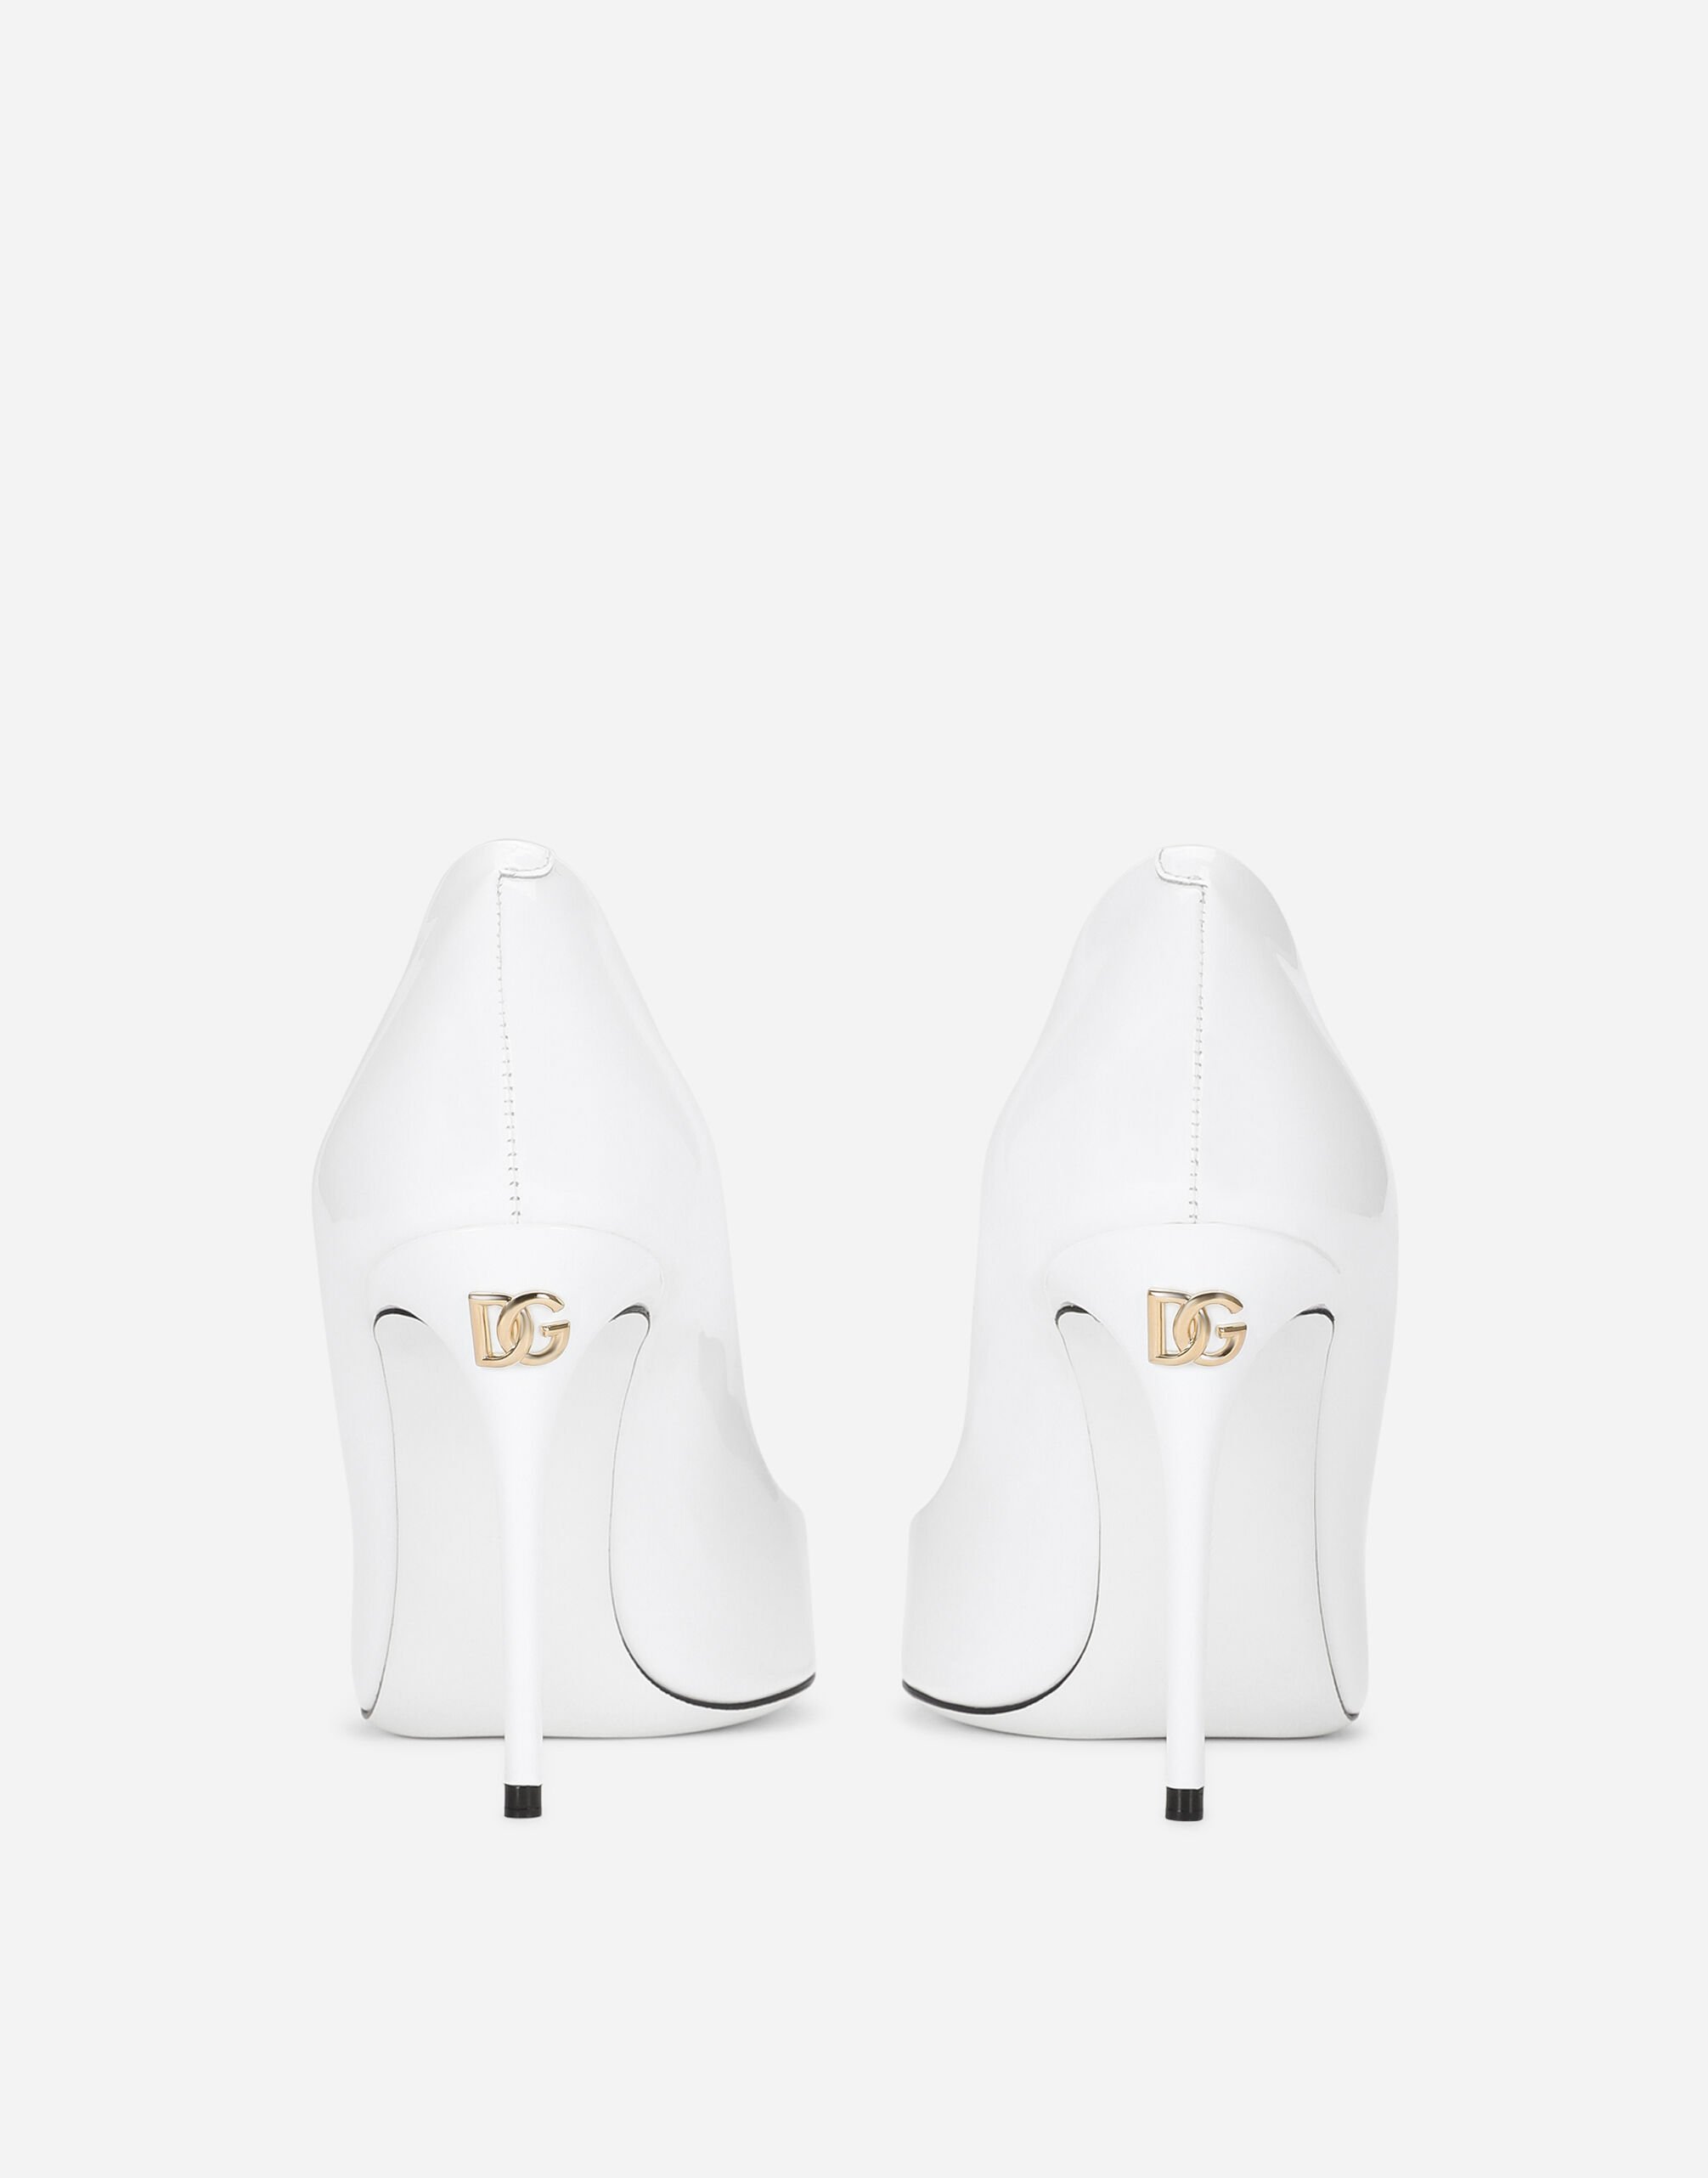 Patent leather Cardinale pumps in White for Women | Dolce&Gabbana®